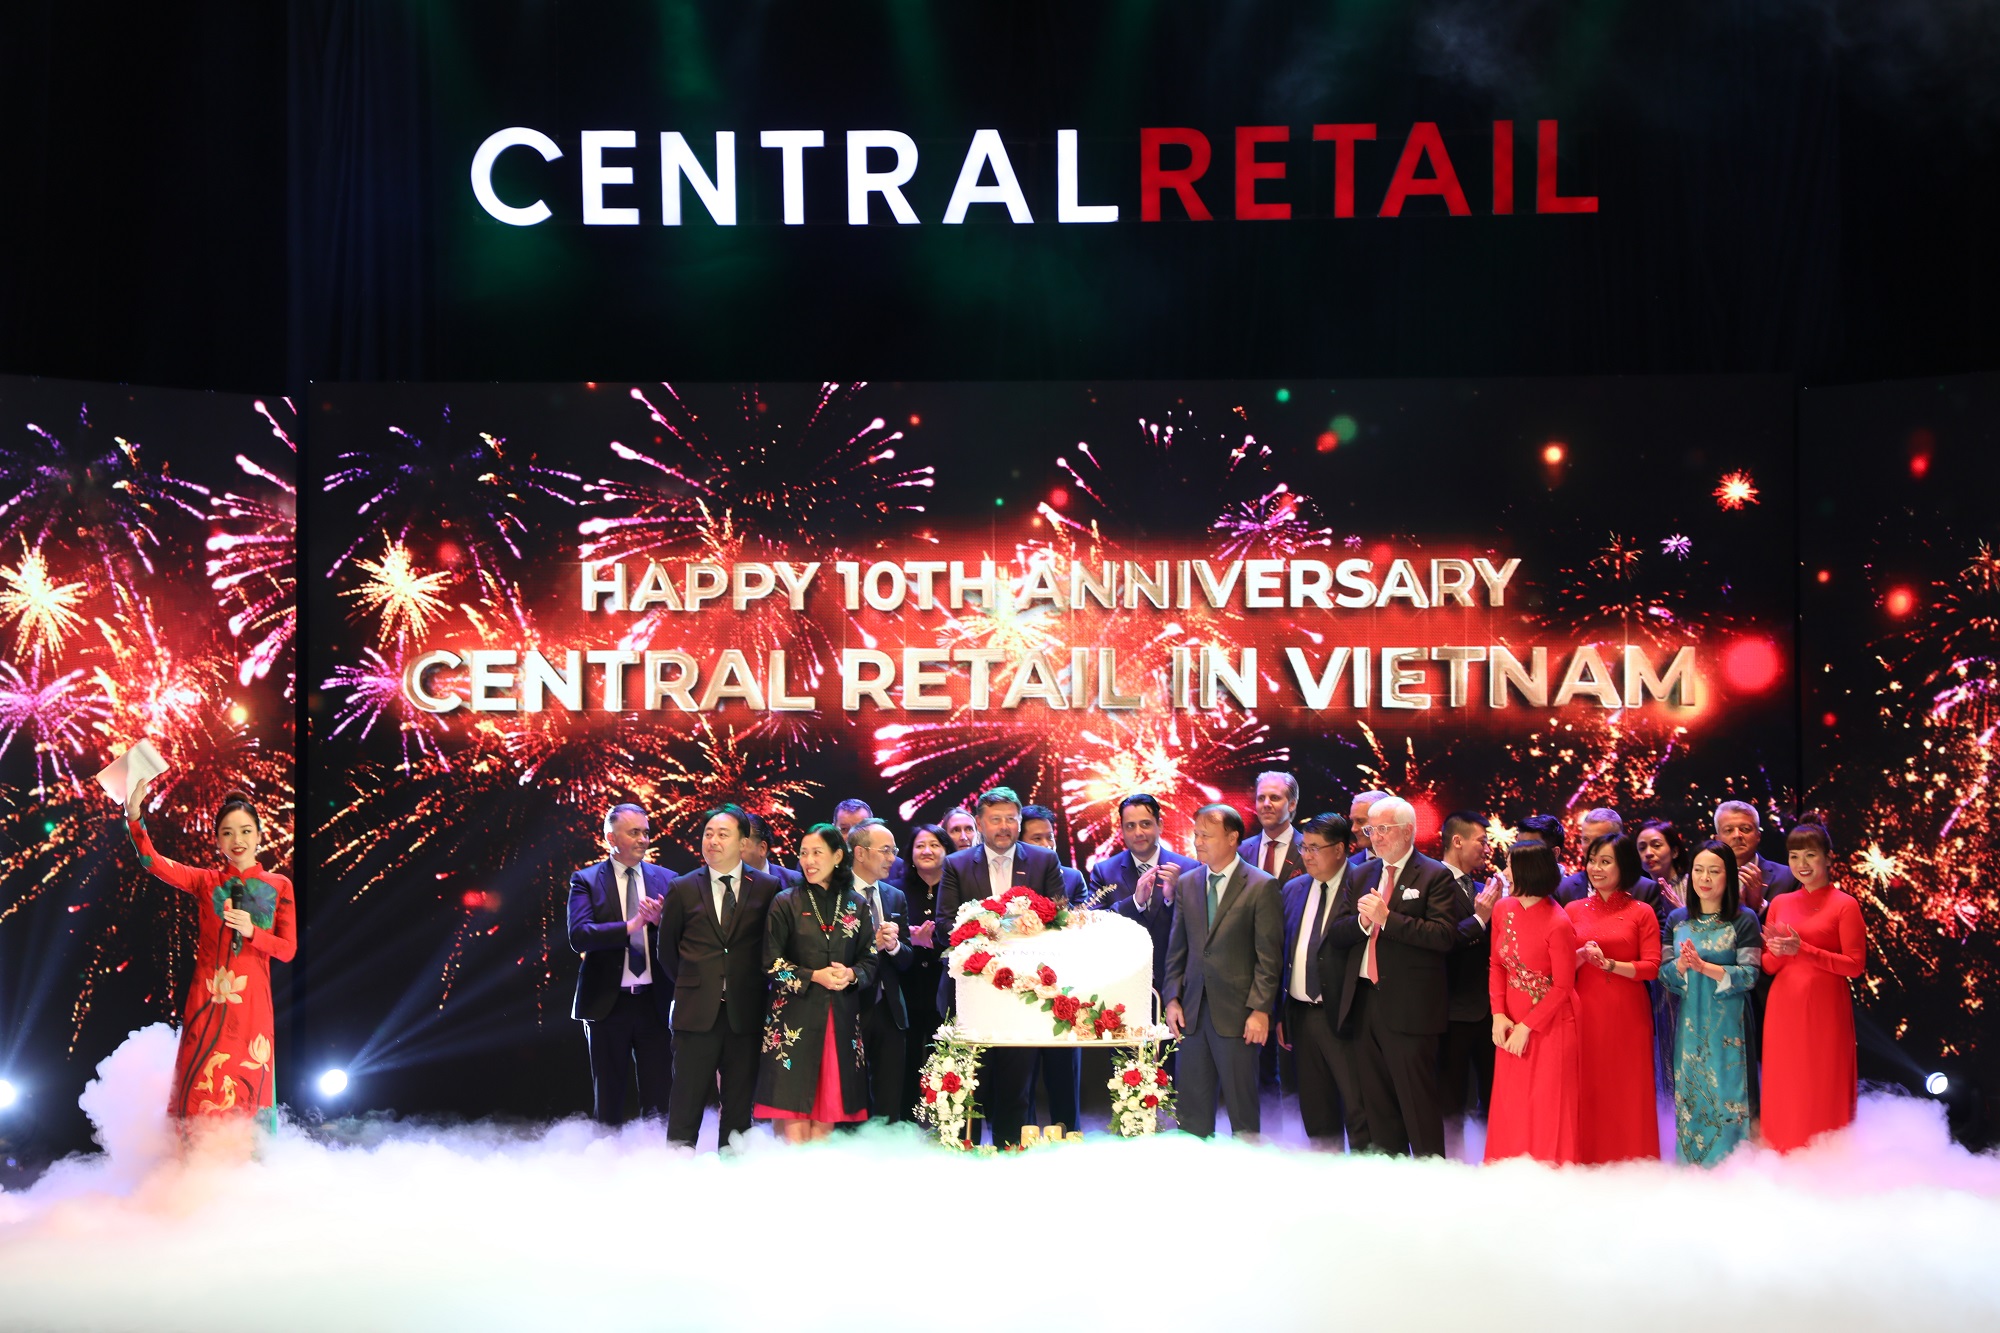 Central Retail in Vietnam celebrated its 10th Anniversary